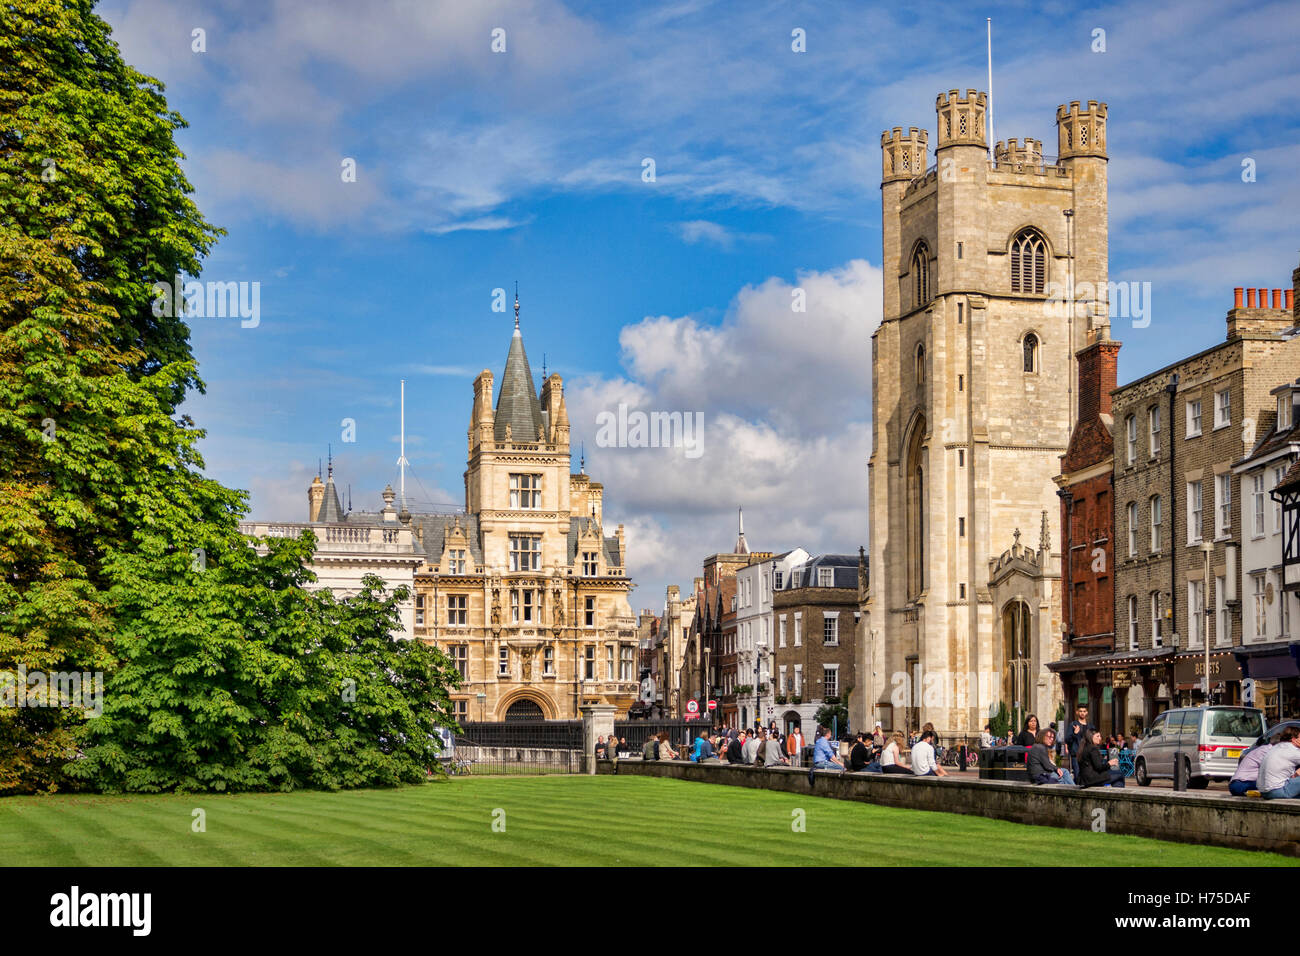 Kings Parade, Cambridge, in early autumn. Great St Mary's Church, Trinity College, the Senate House and Kings College can be see Stock Photo